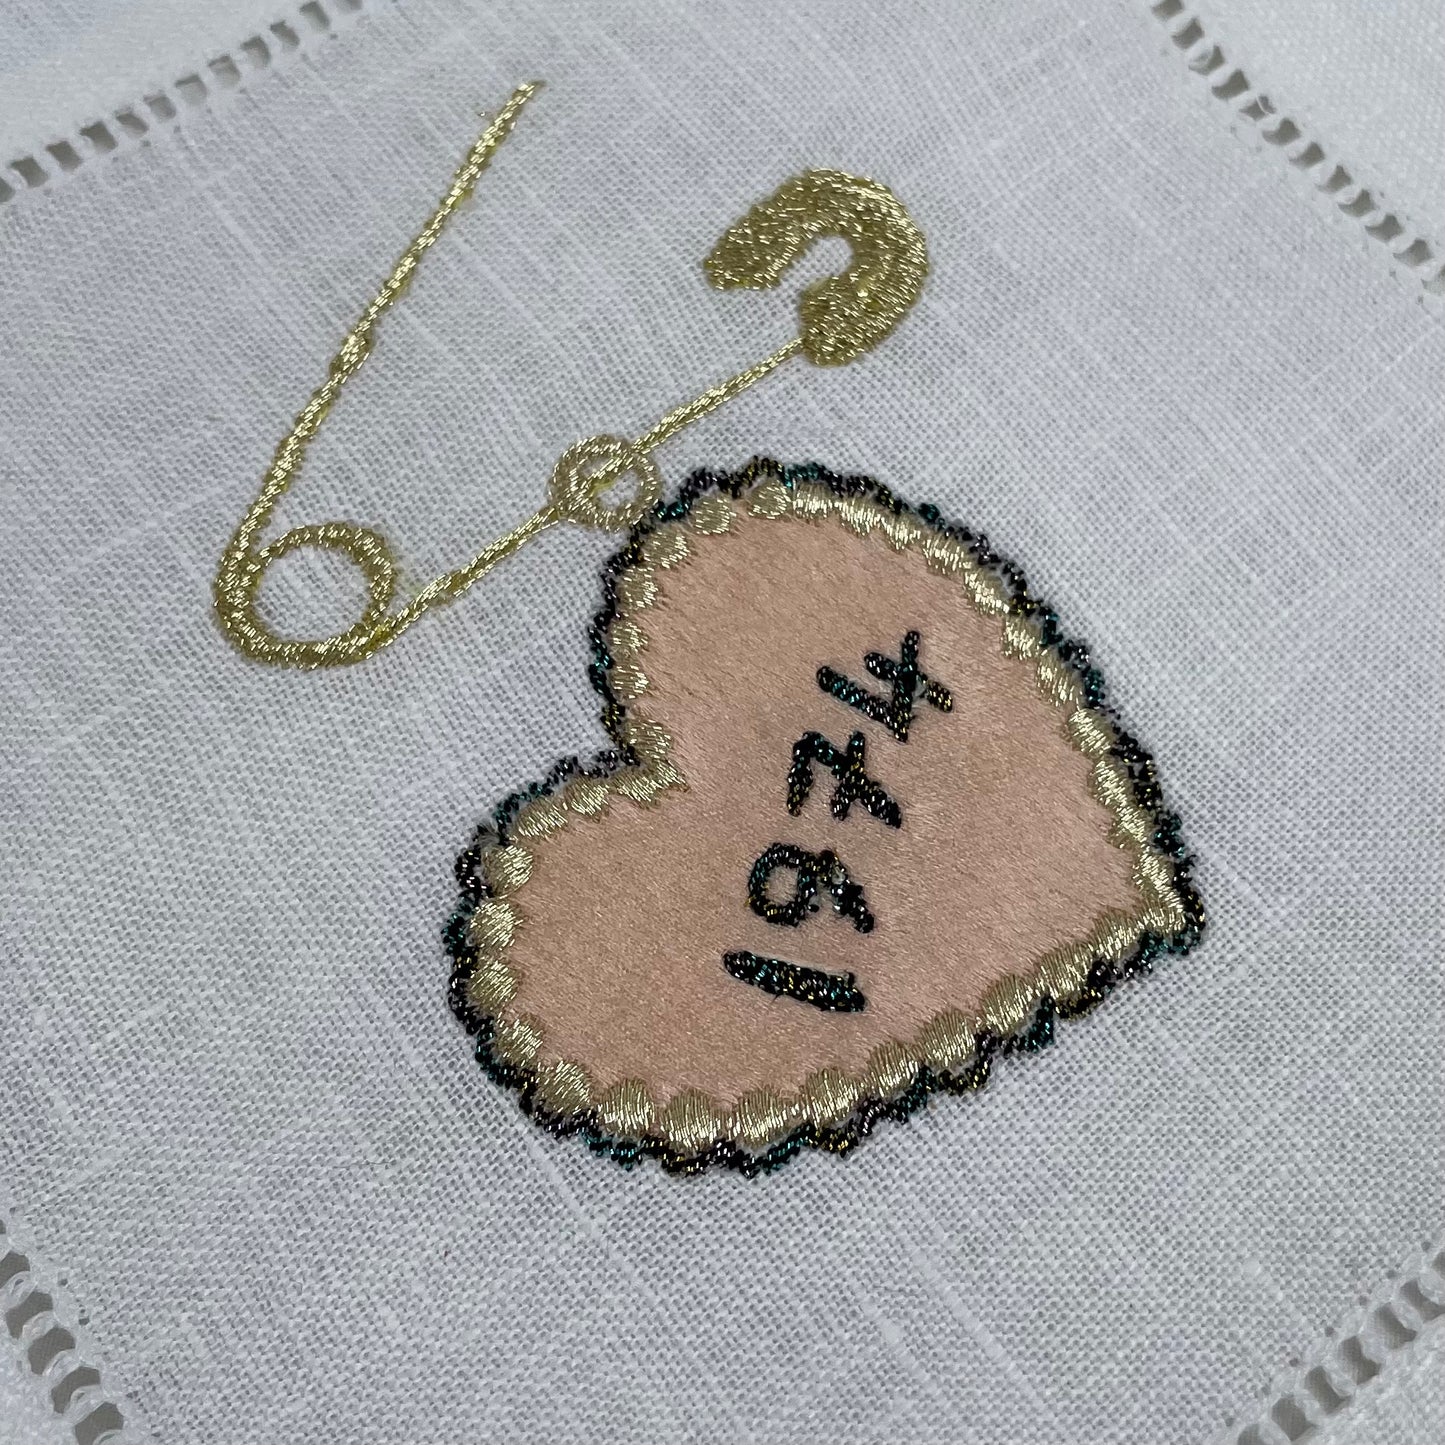 Close-up of embroidered date heart and pin charm in peach